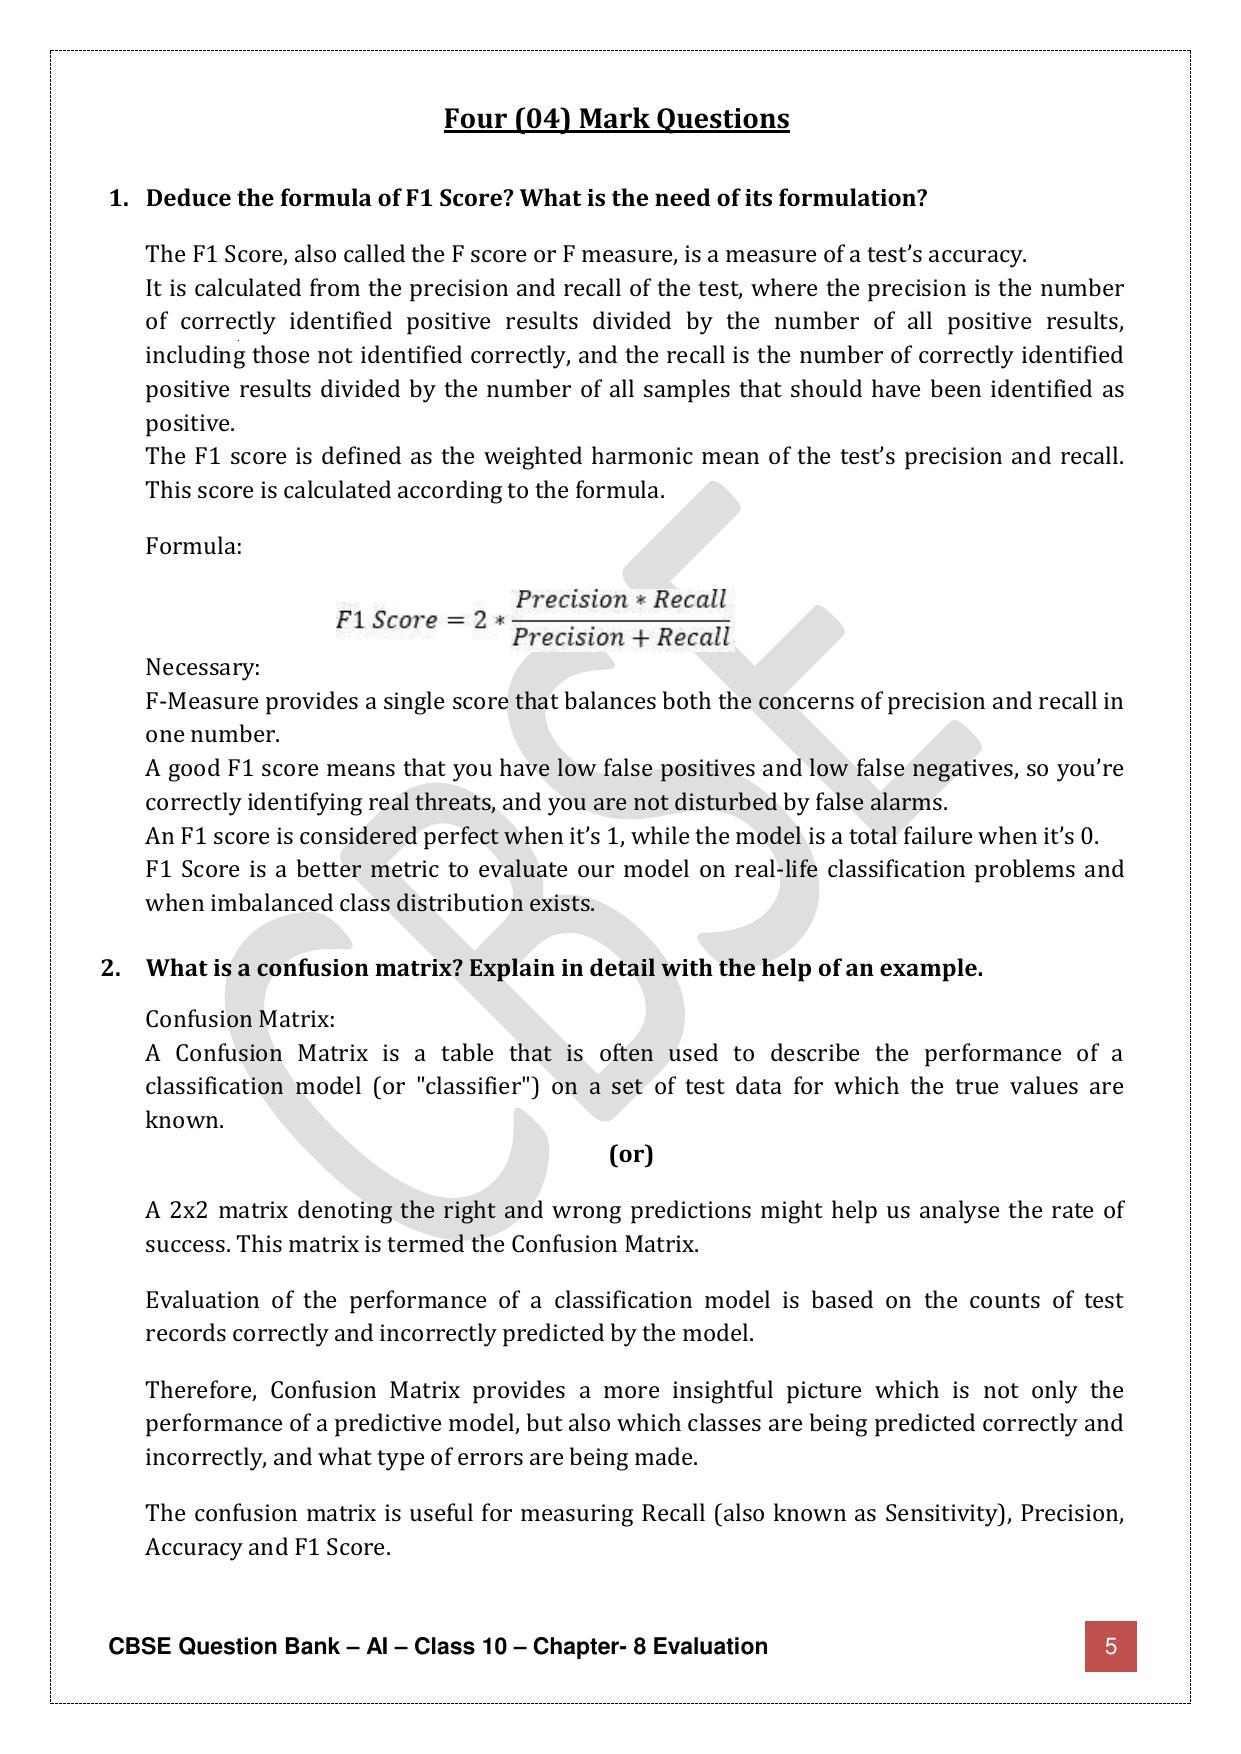 CBSE Class 10 Artificial Intelligence - Chapter 8 Question Bank - Page 5